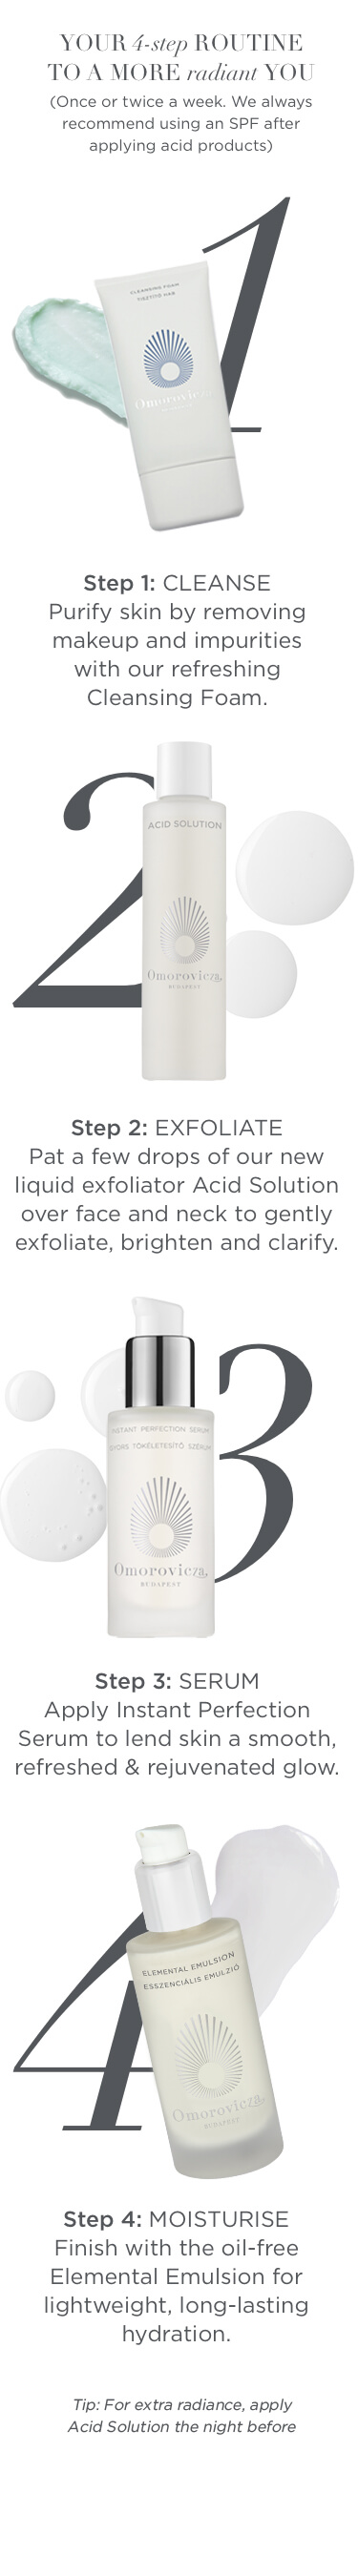 Acid solution skin care routine. Your 4 step routine to a more radiant you. Step 1: Cleanse, Step 2: Exfoliate, Step 3: Serum, Step 4: Mosturise